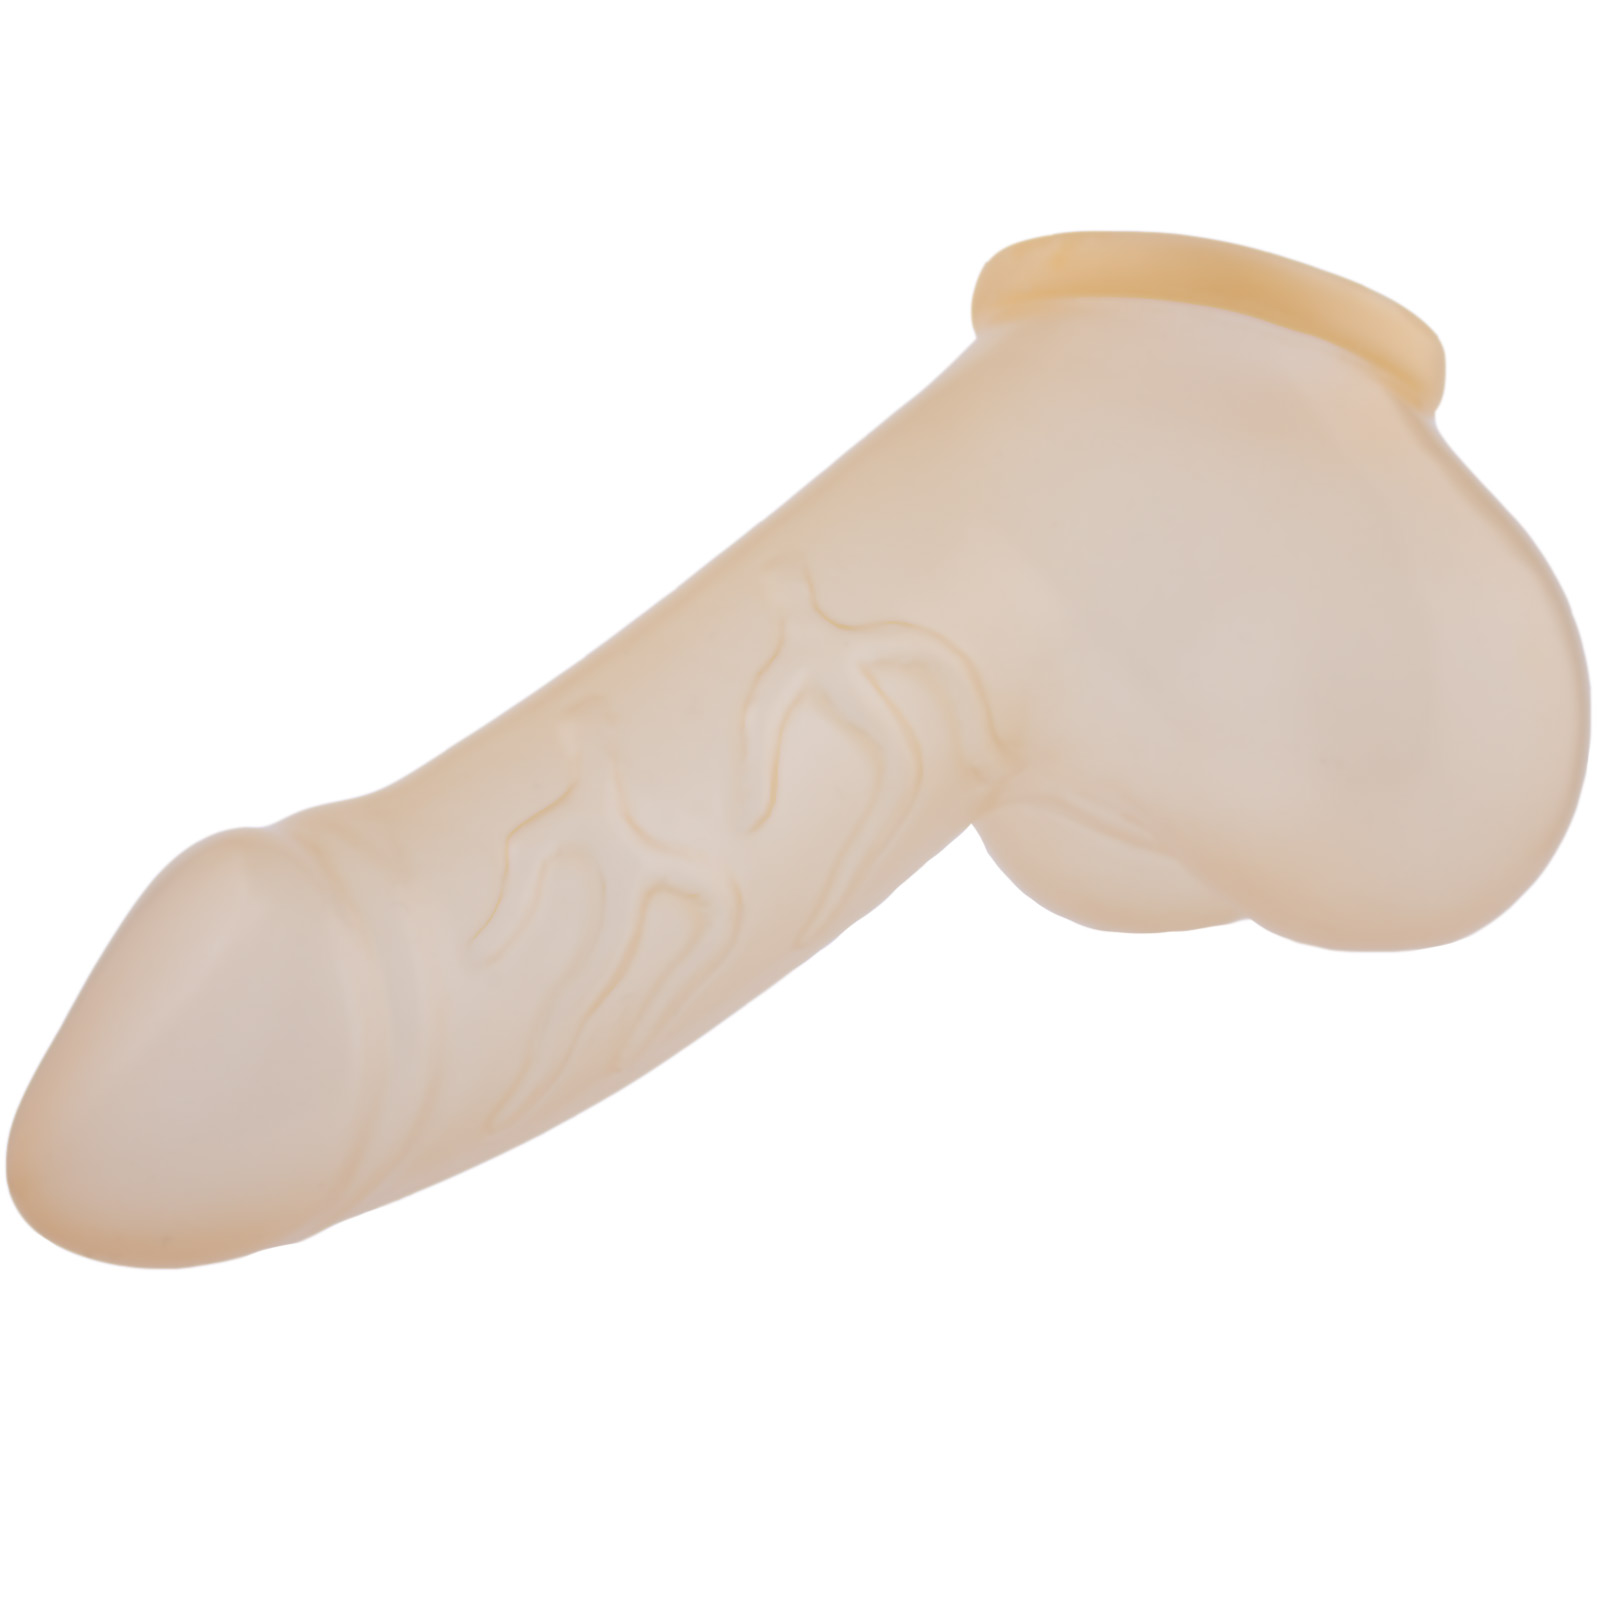 Toylie Latex Penis Sleeve «DANNY» semi-transparent, with strong veins and testicle divider - suitable for vegans